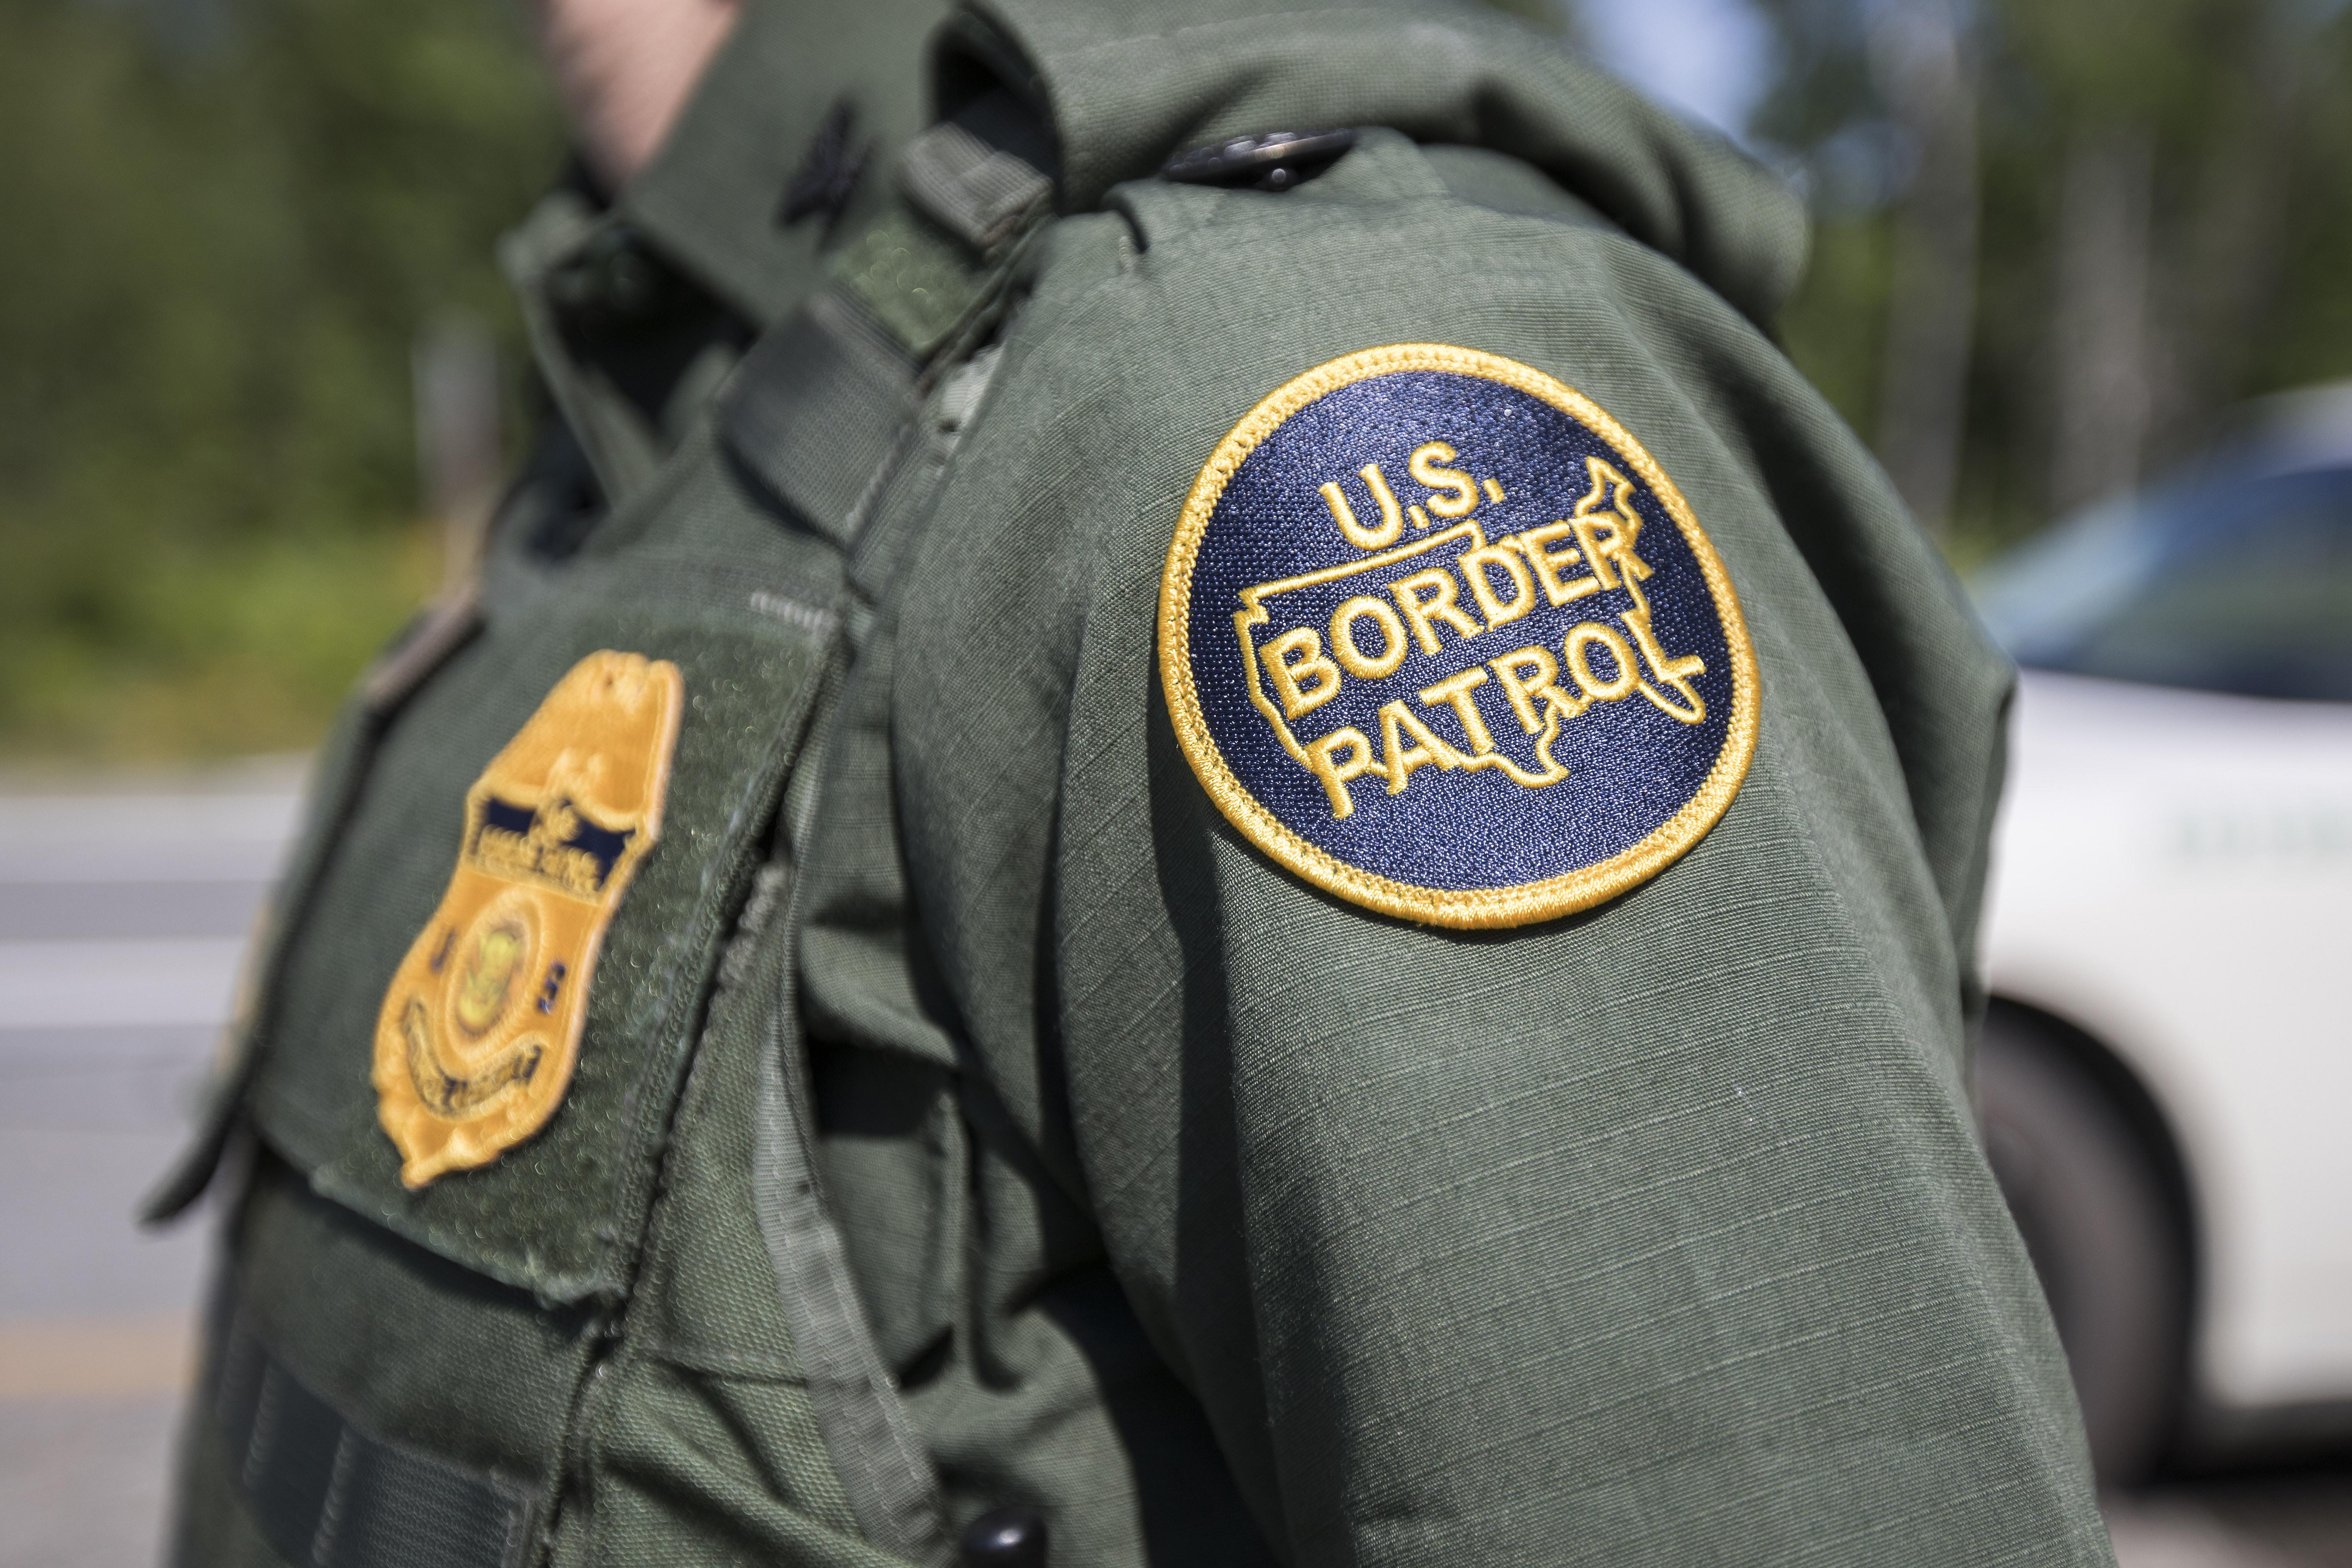 The shoulder of a Border Patrol agent is seen, with the institution's patch prominently displayed.